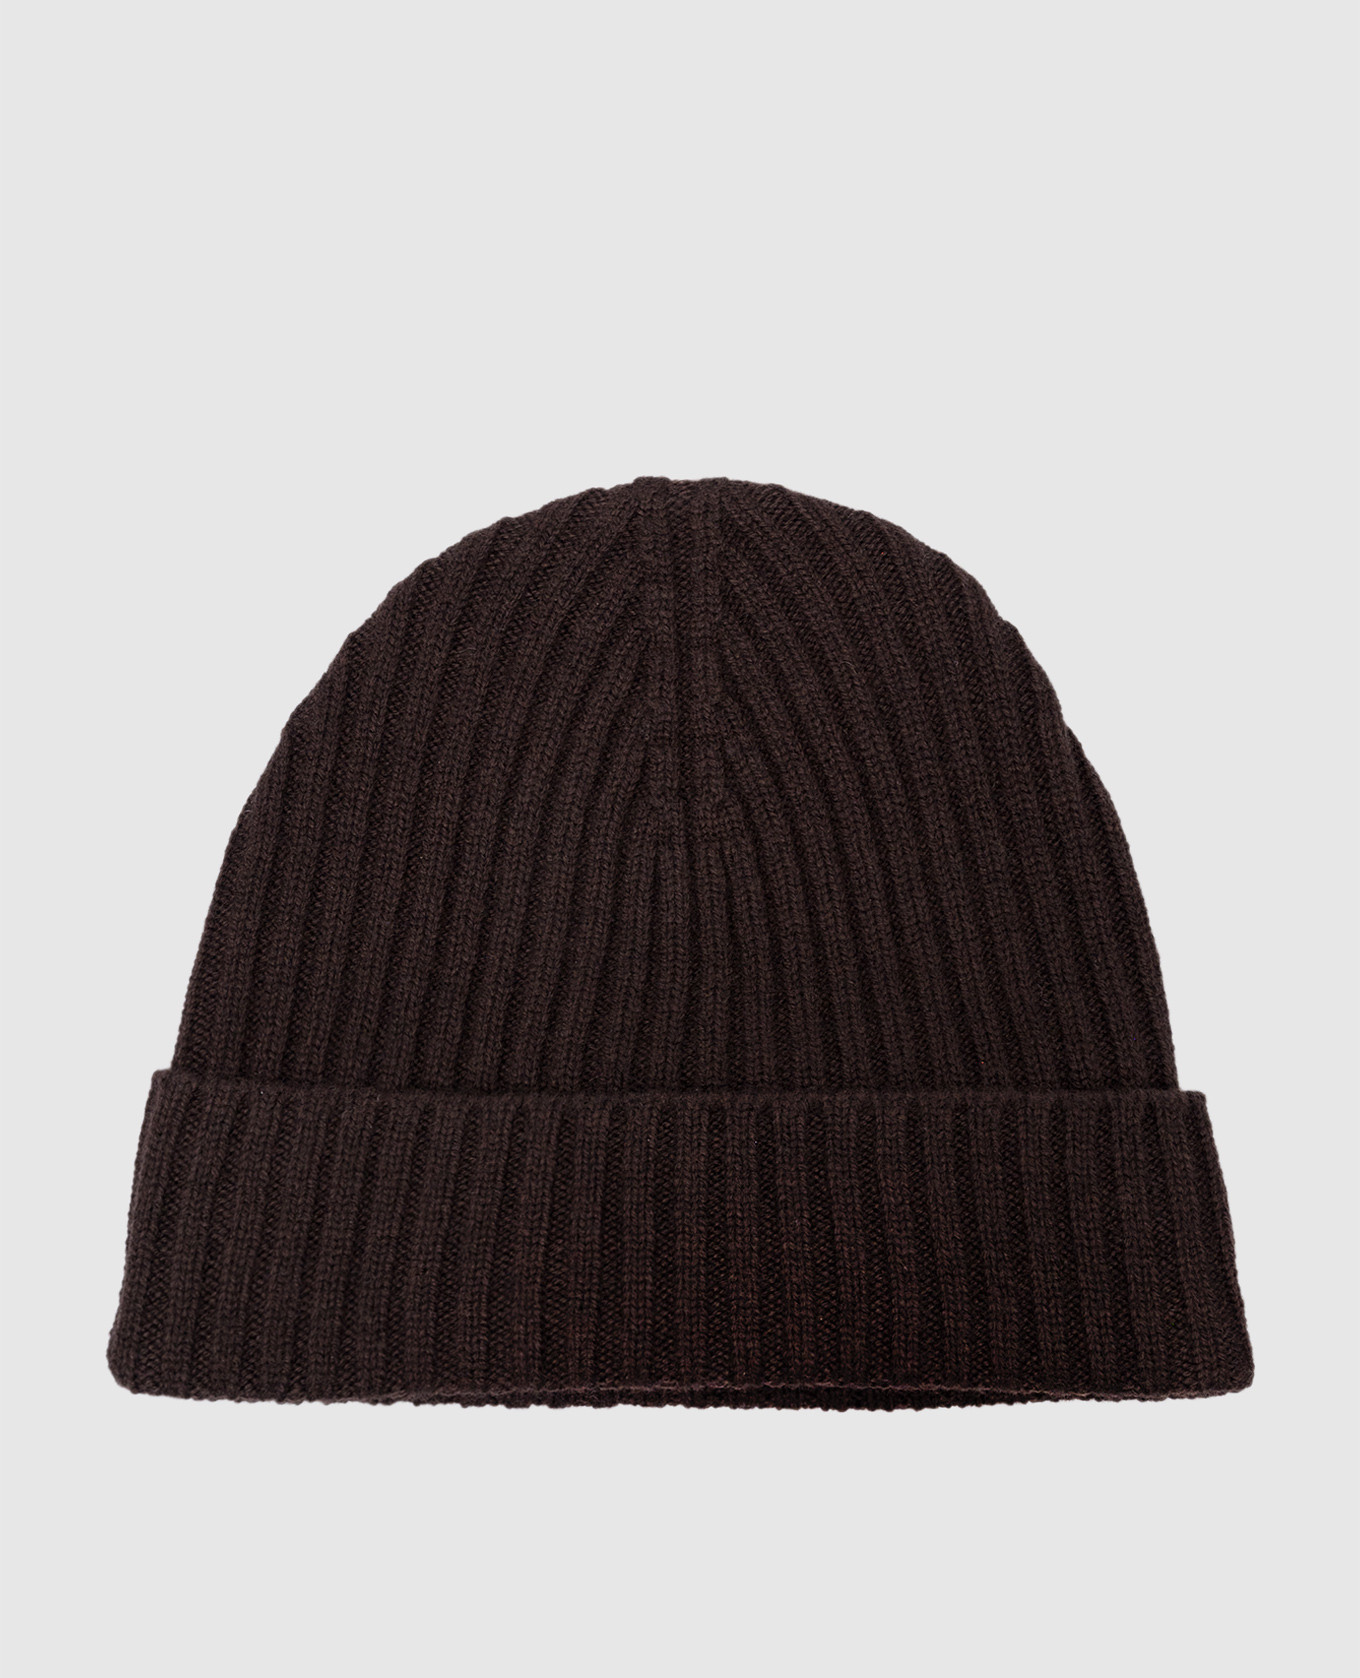 Brown cap made of wool and cashmere